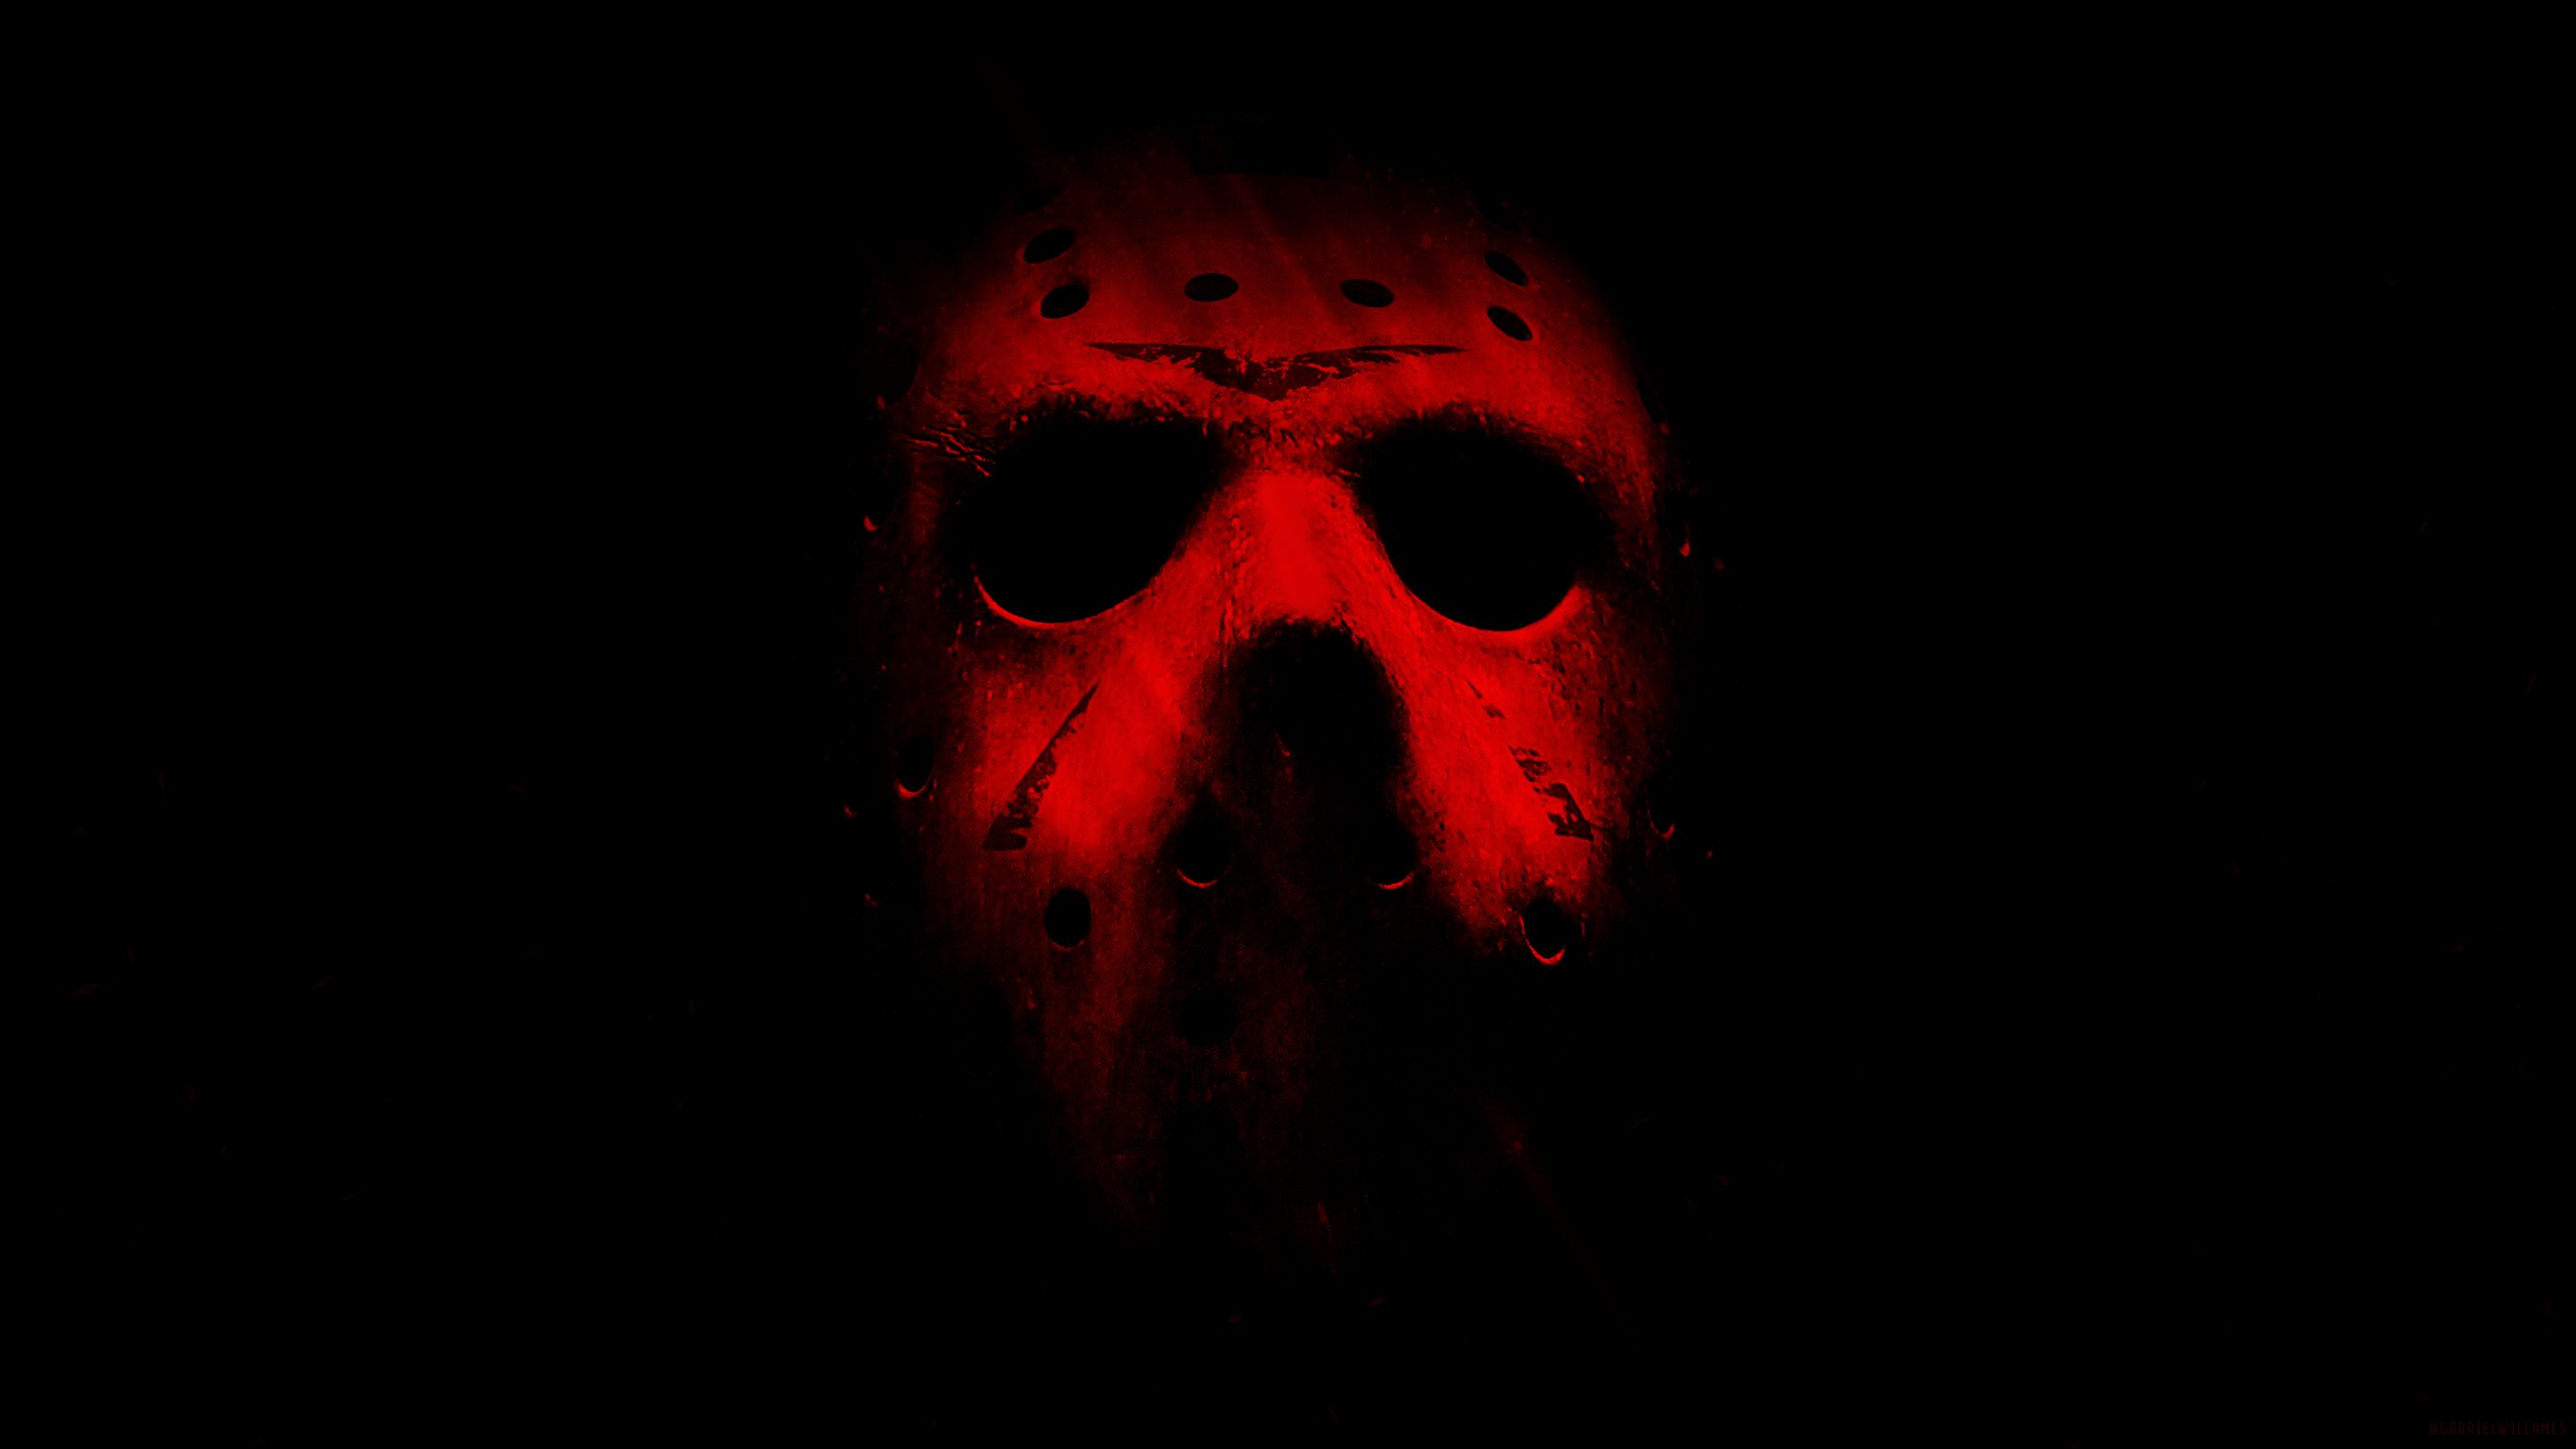 jason voorhees, friday the 13th, movie, friday the 13th (2009)